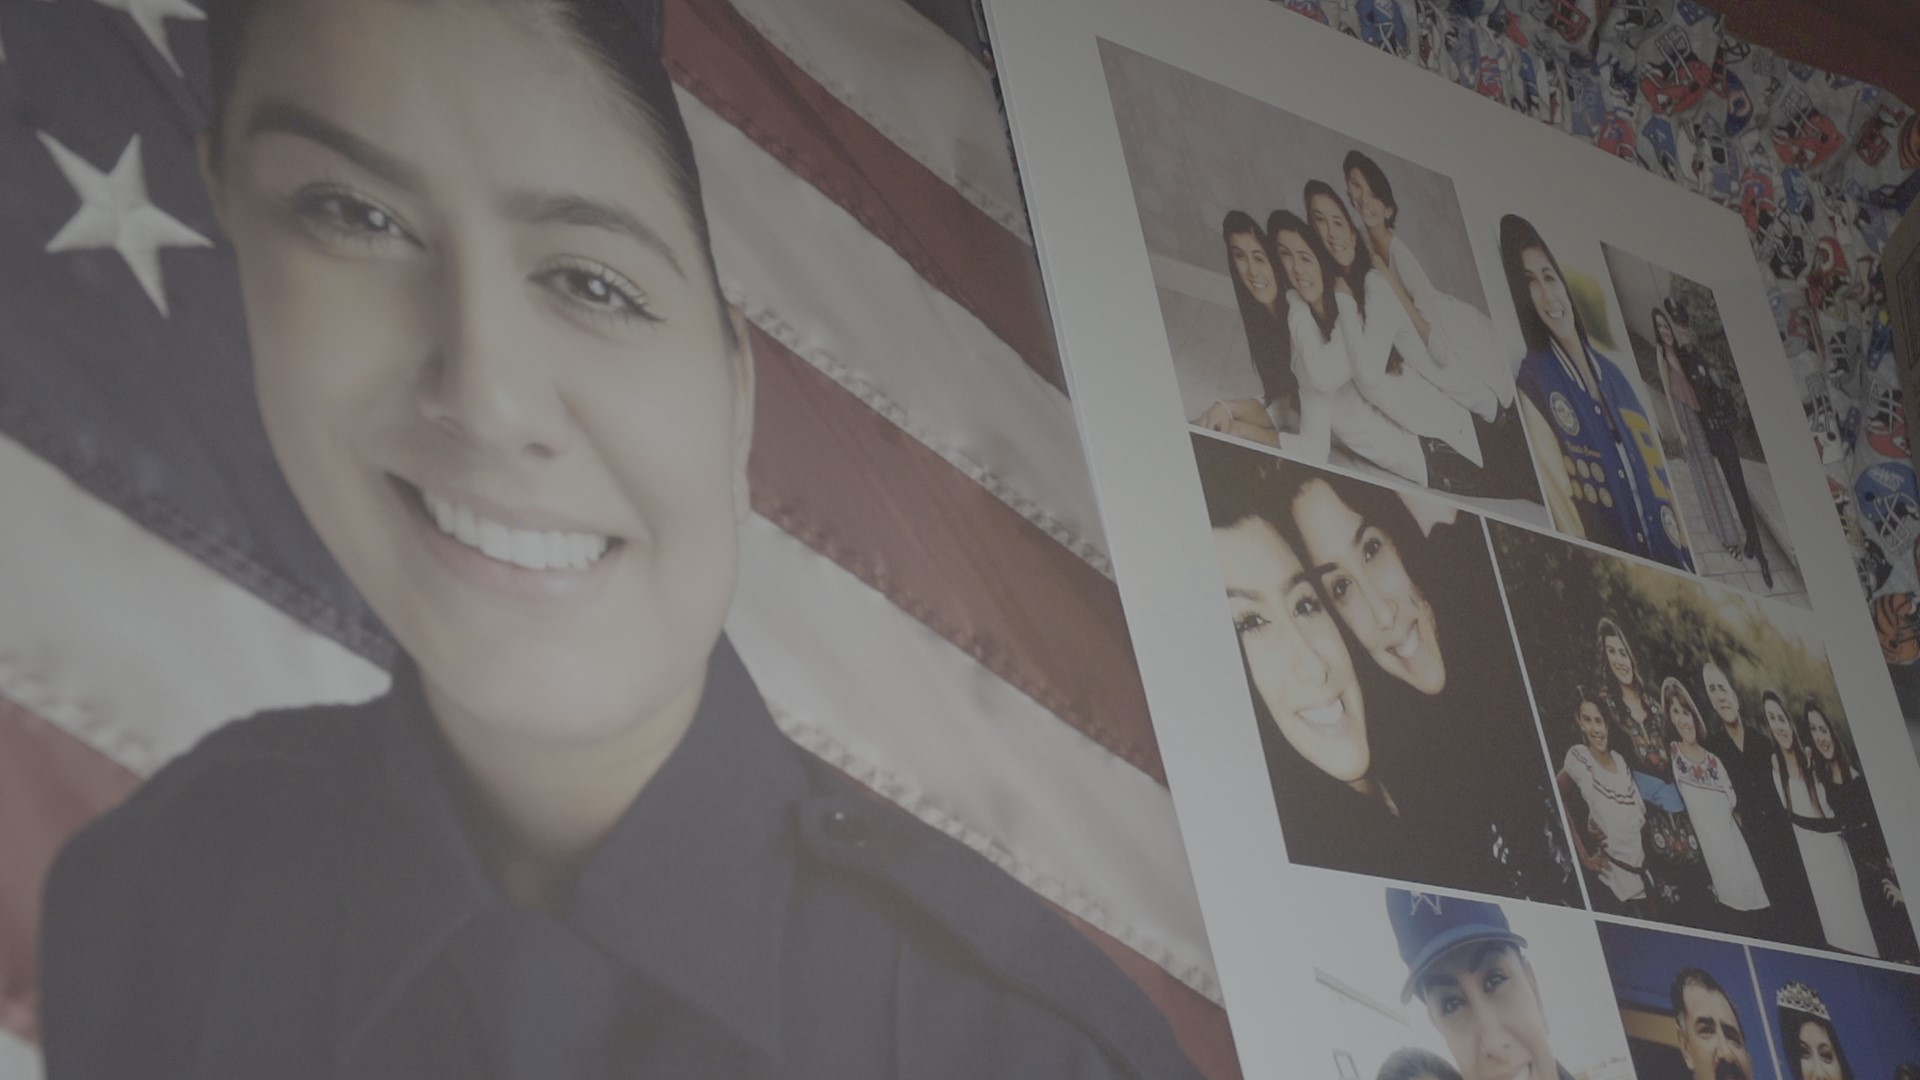 Davis Police Officer Natalie Corona's short, but impactful career in law enforcement continues to move the hearts of those who never got to meet her. On Saturday, hundreds of people from all over Northern California are set to participate in an honor ride in Natalie's hometown.